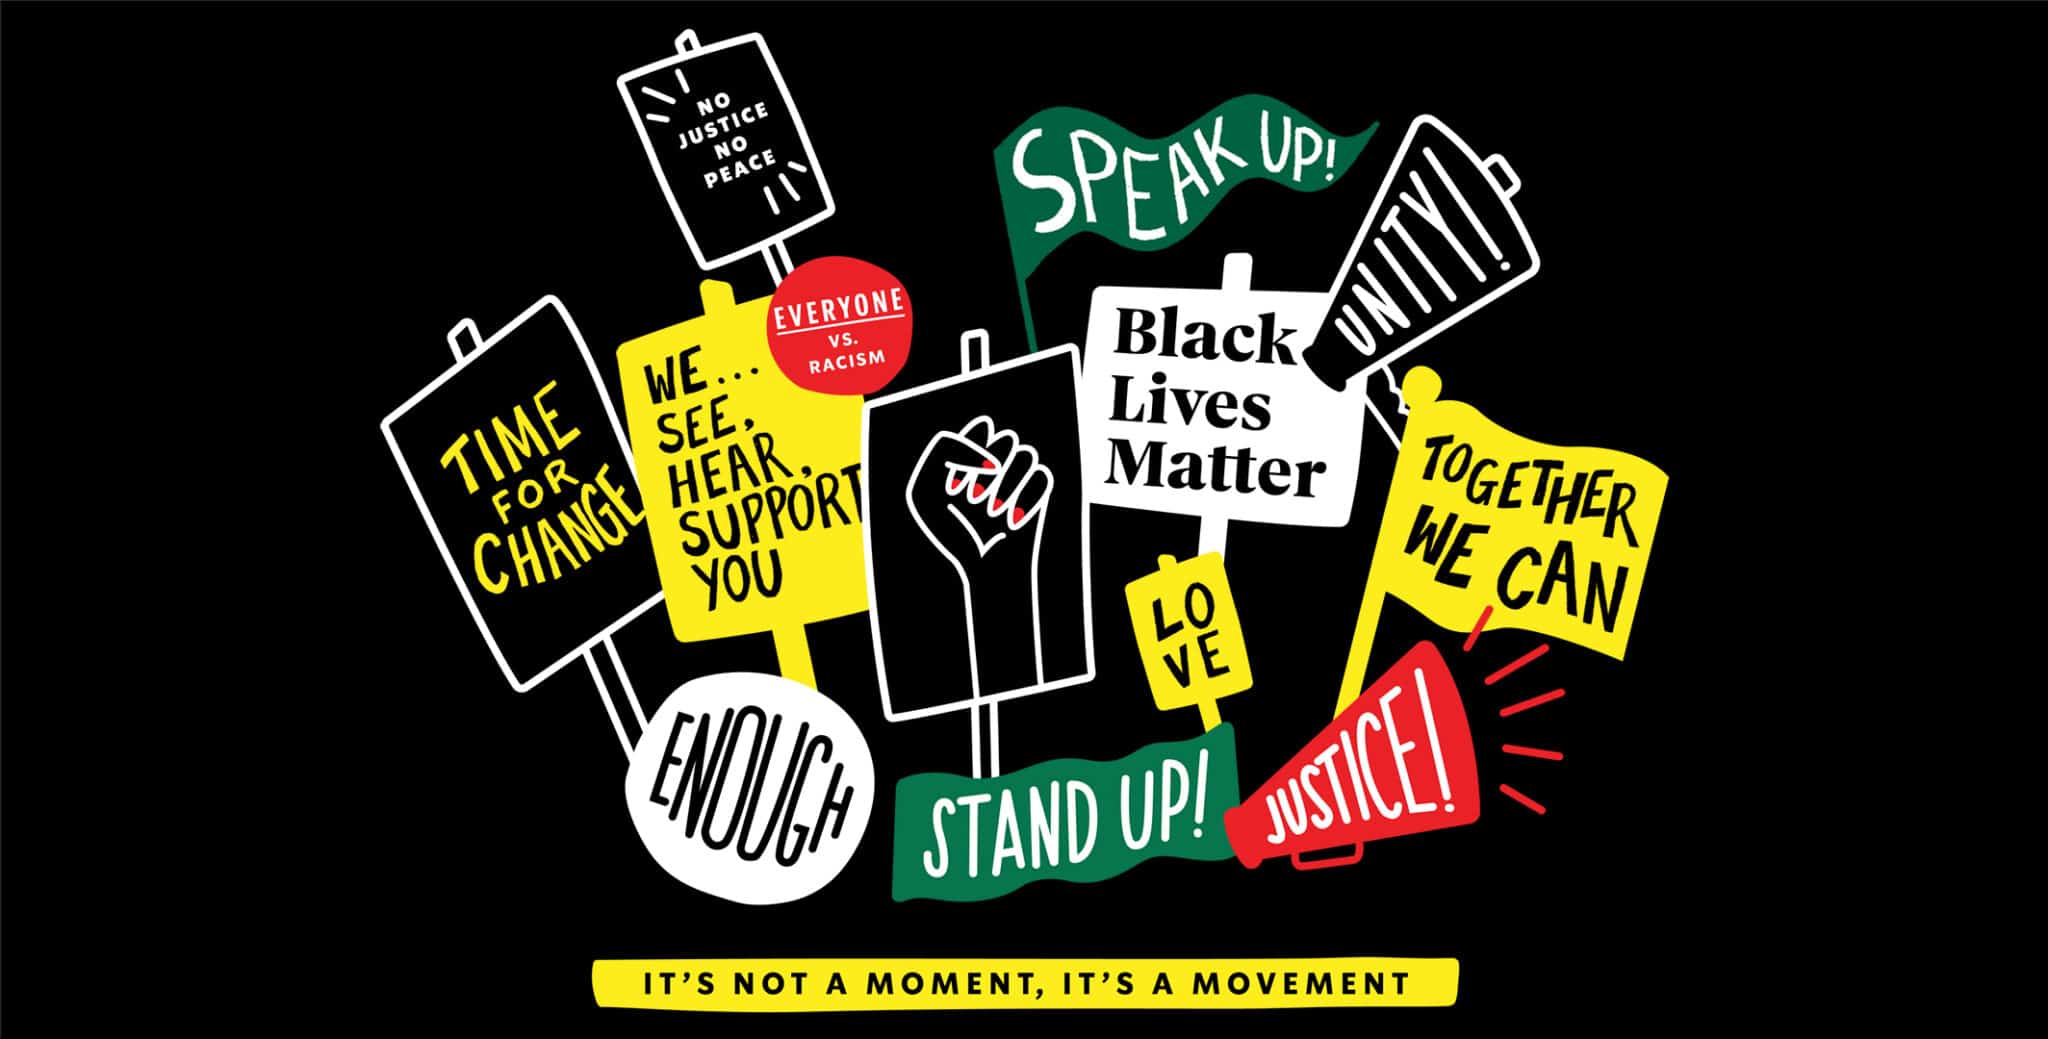 Artwork designed by Starbucks Coffee for worker’s t-shirts during the Black Lives Matter furor, January 2020. Photo: Twitter/@Starbucks.